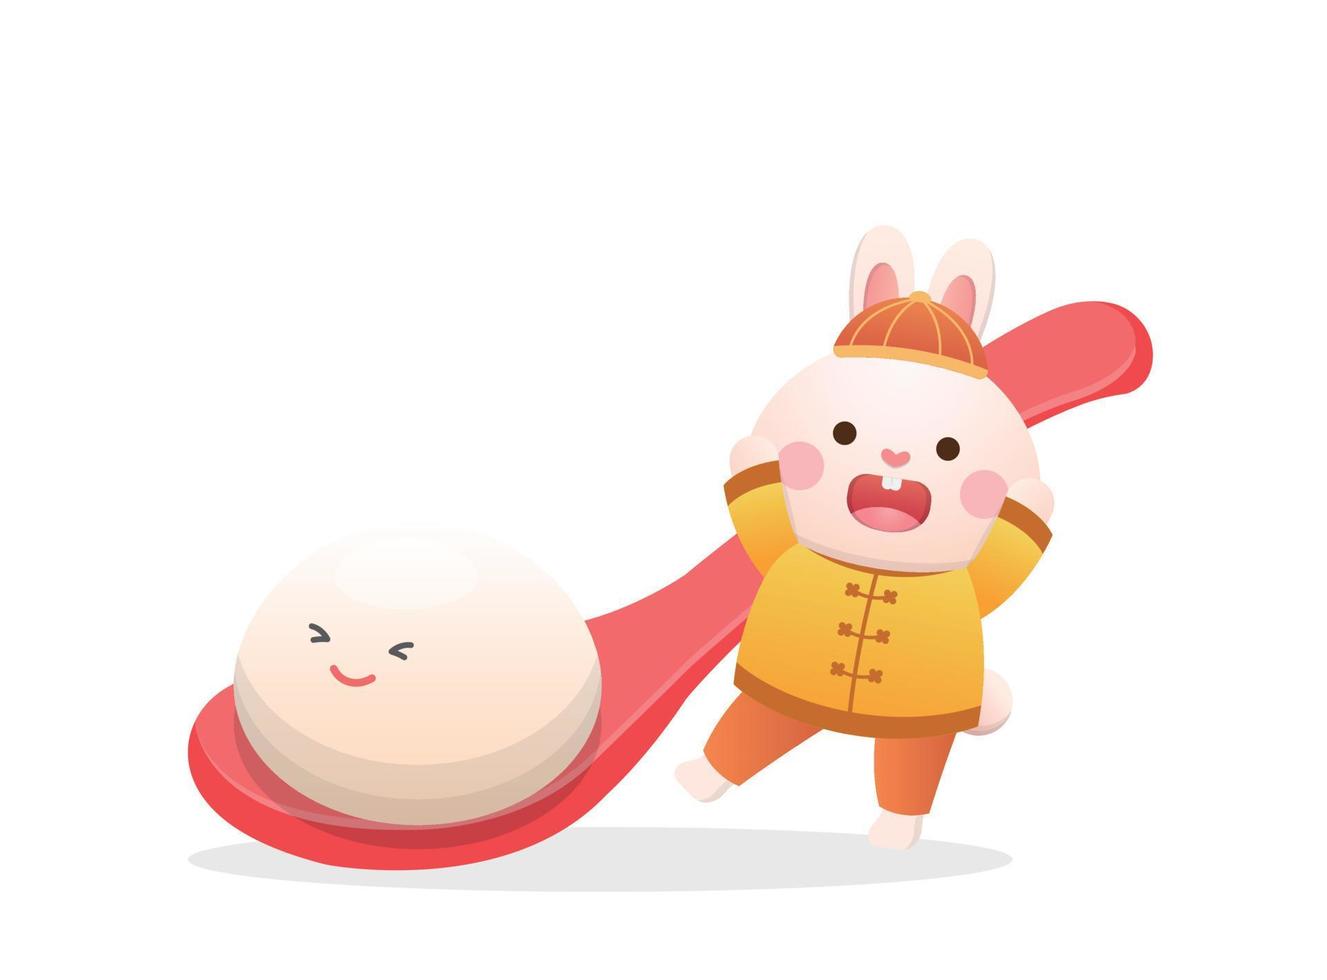 Cute rabbit character or mascot with glutinous rice balls, Lantern Festival or Winter Solstice, delicious glutinous rice sweet food in Asia, playful and cute cartoon style vector